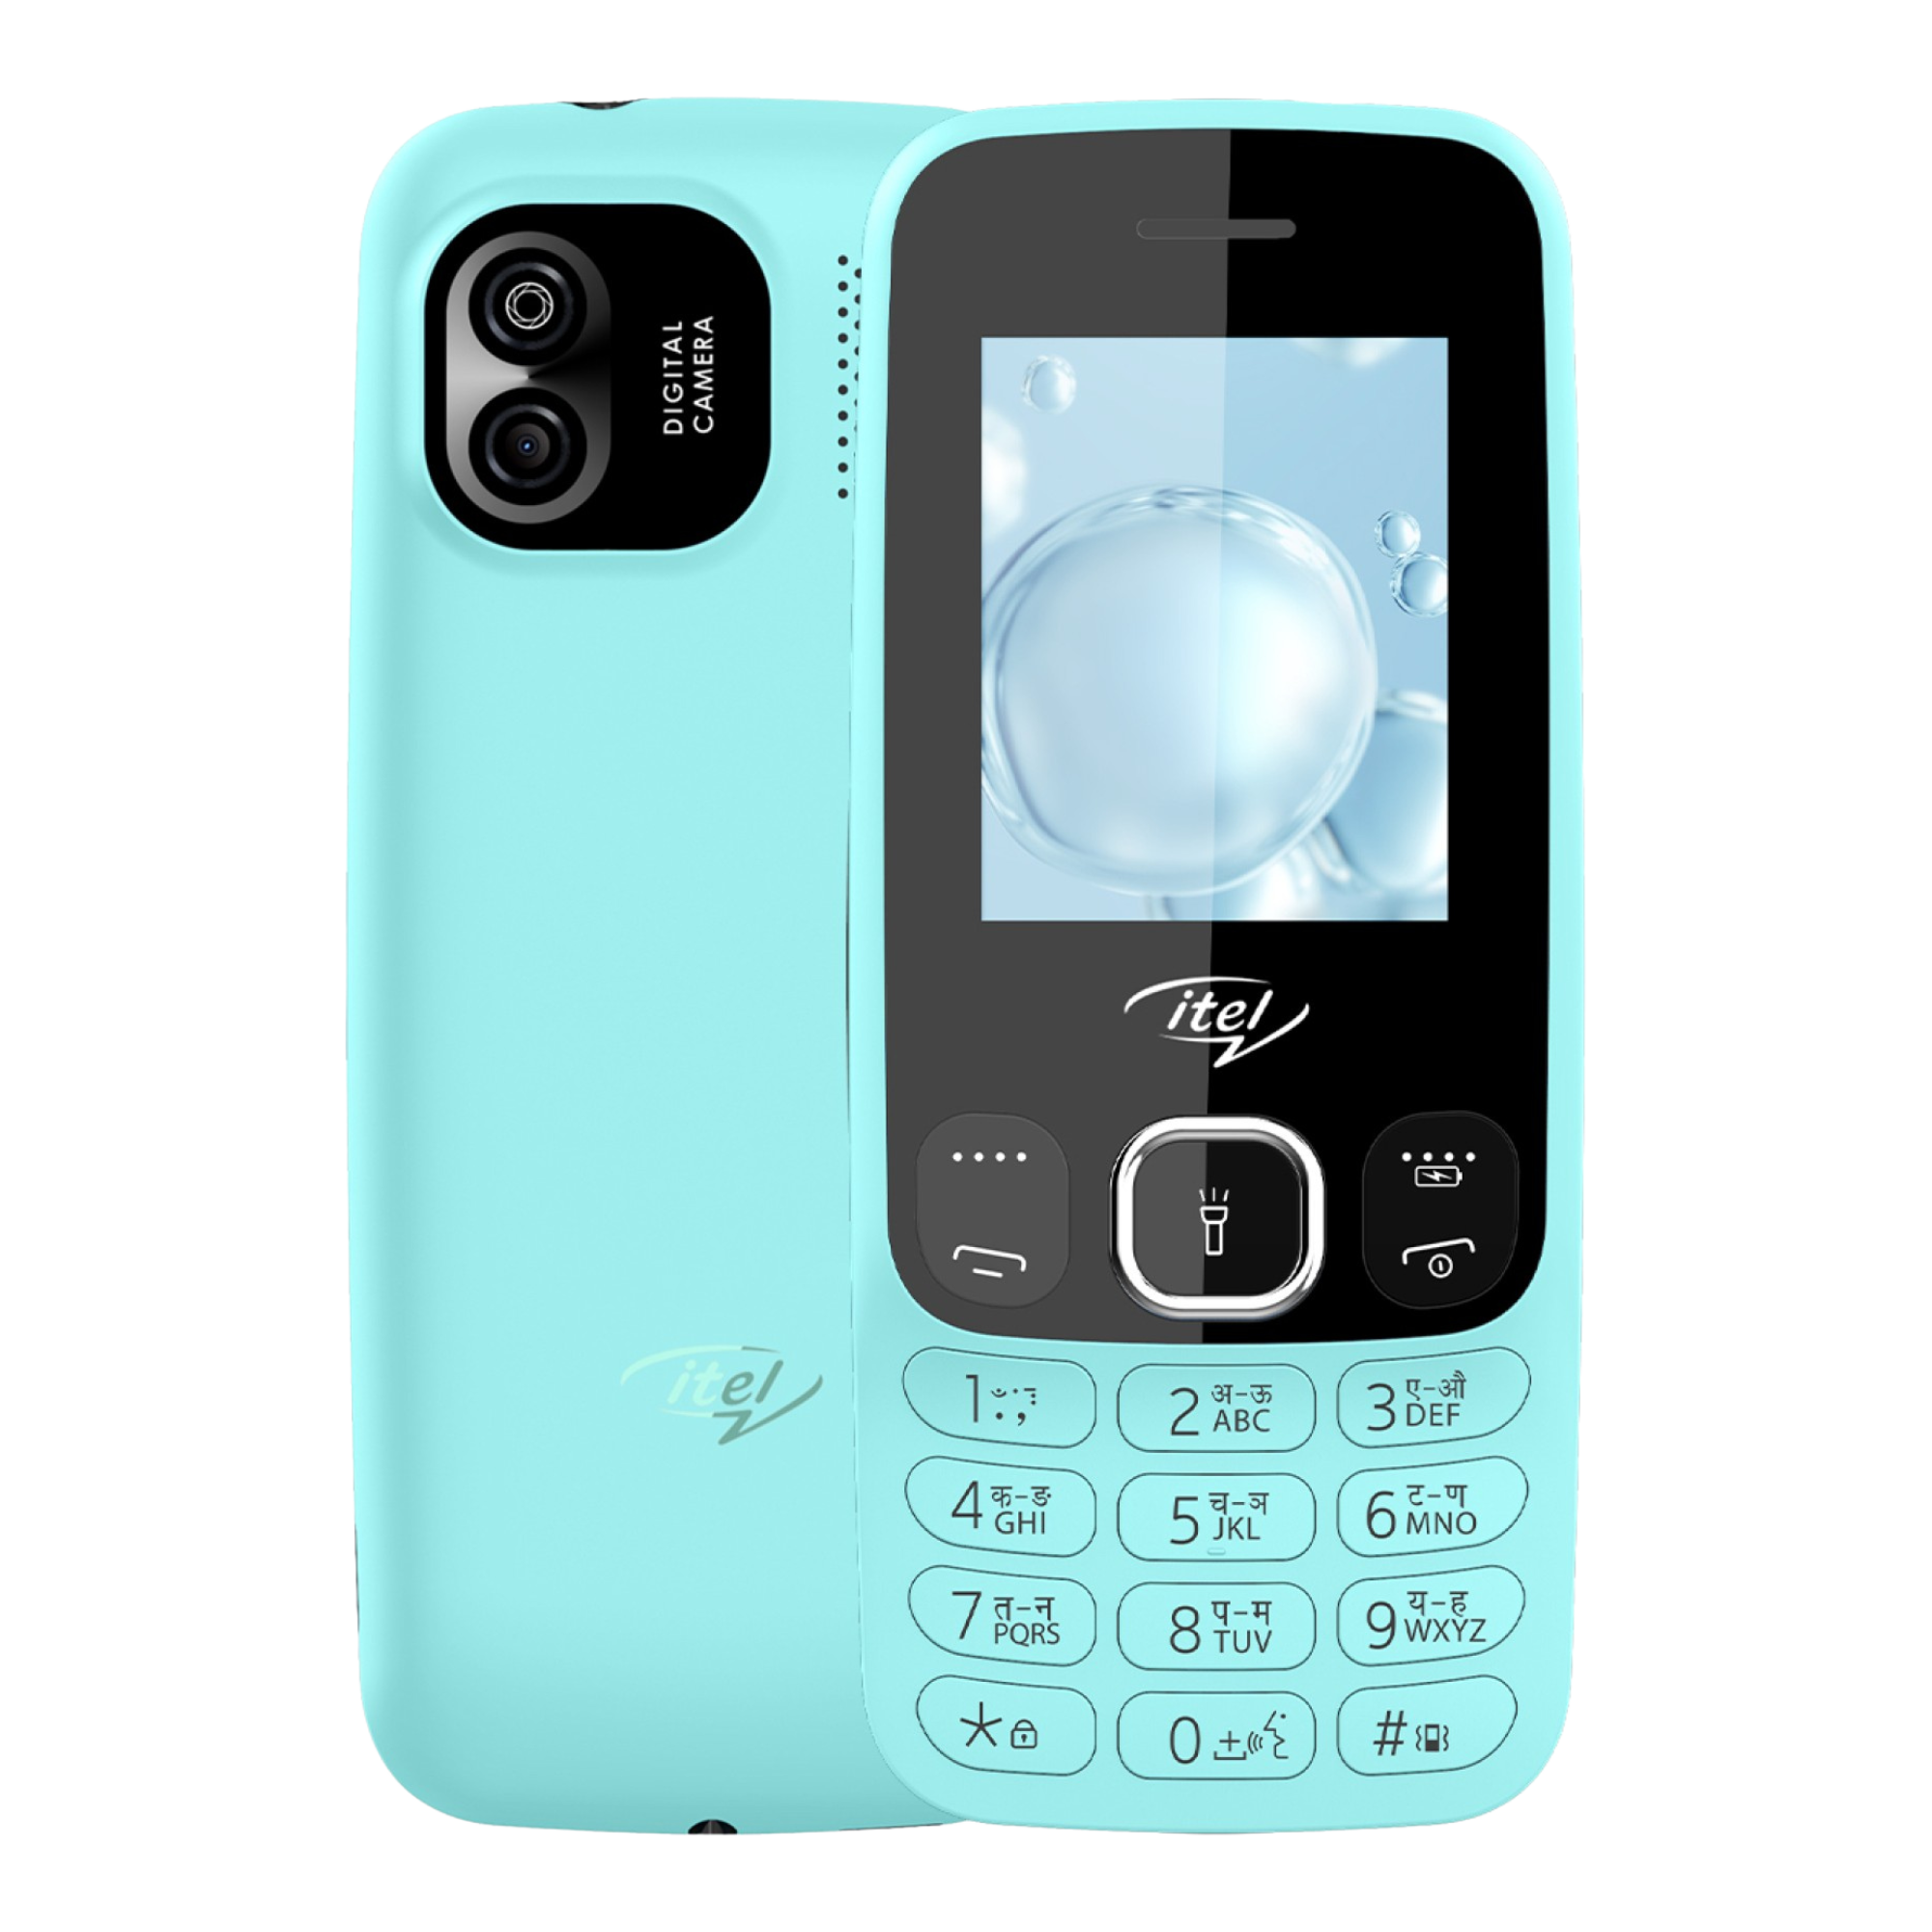 Grab Itel 2175 Pro (Green) Online at the Best Price!